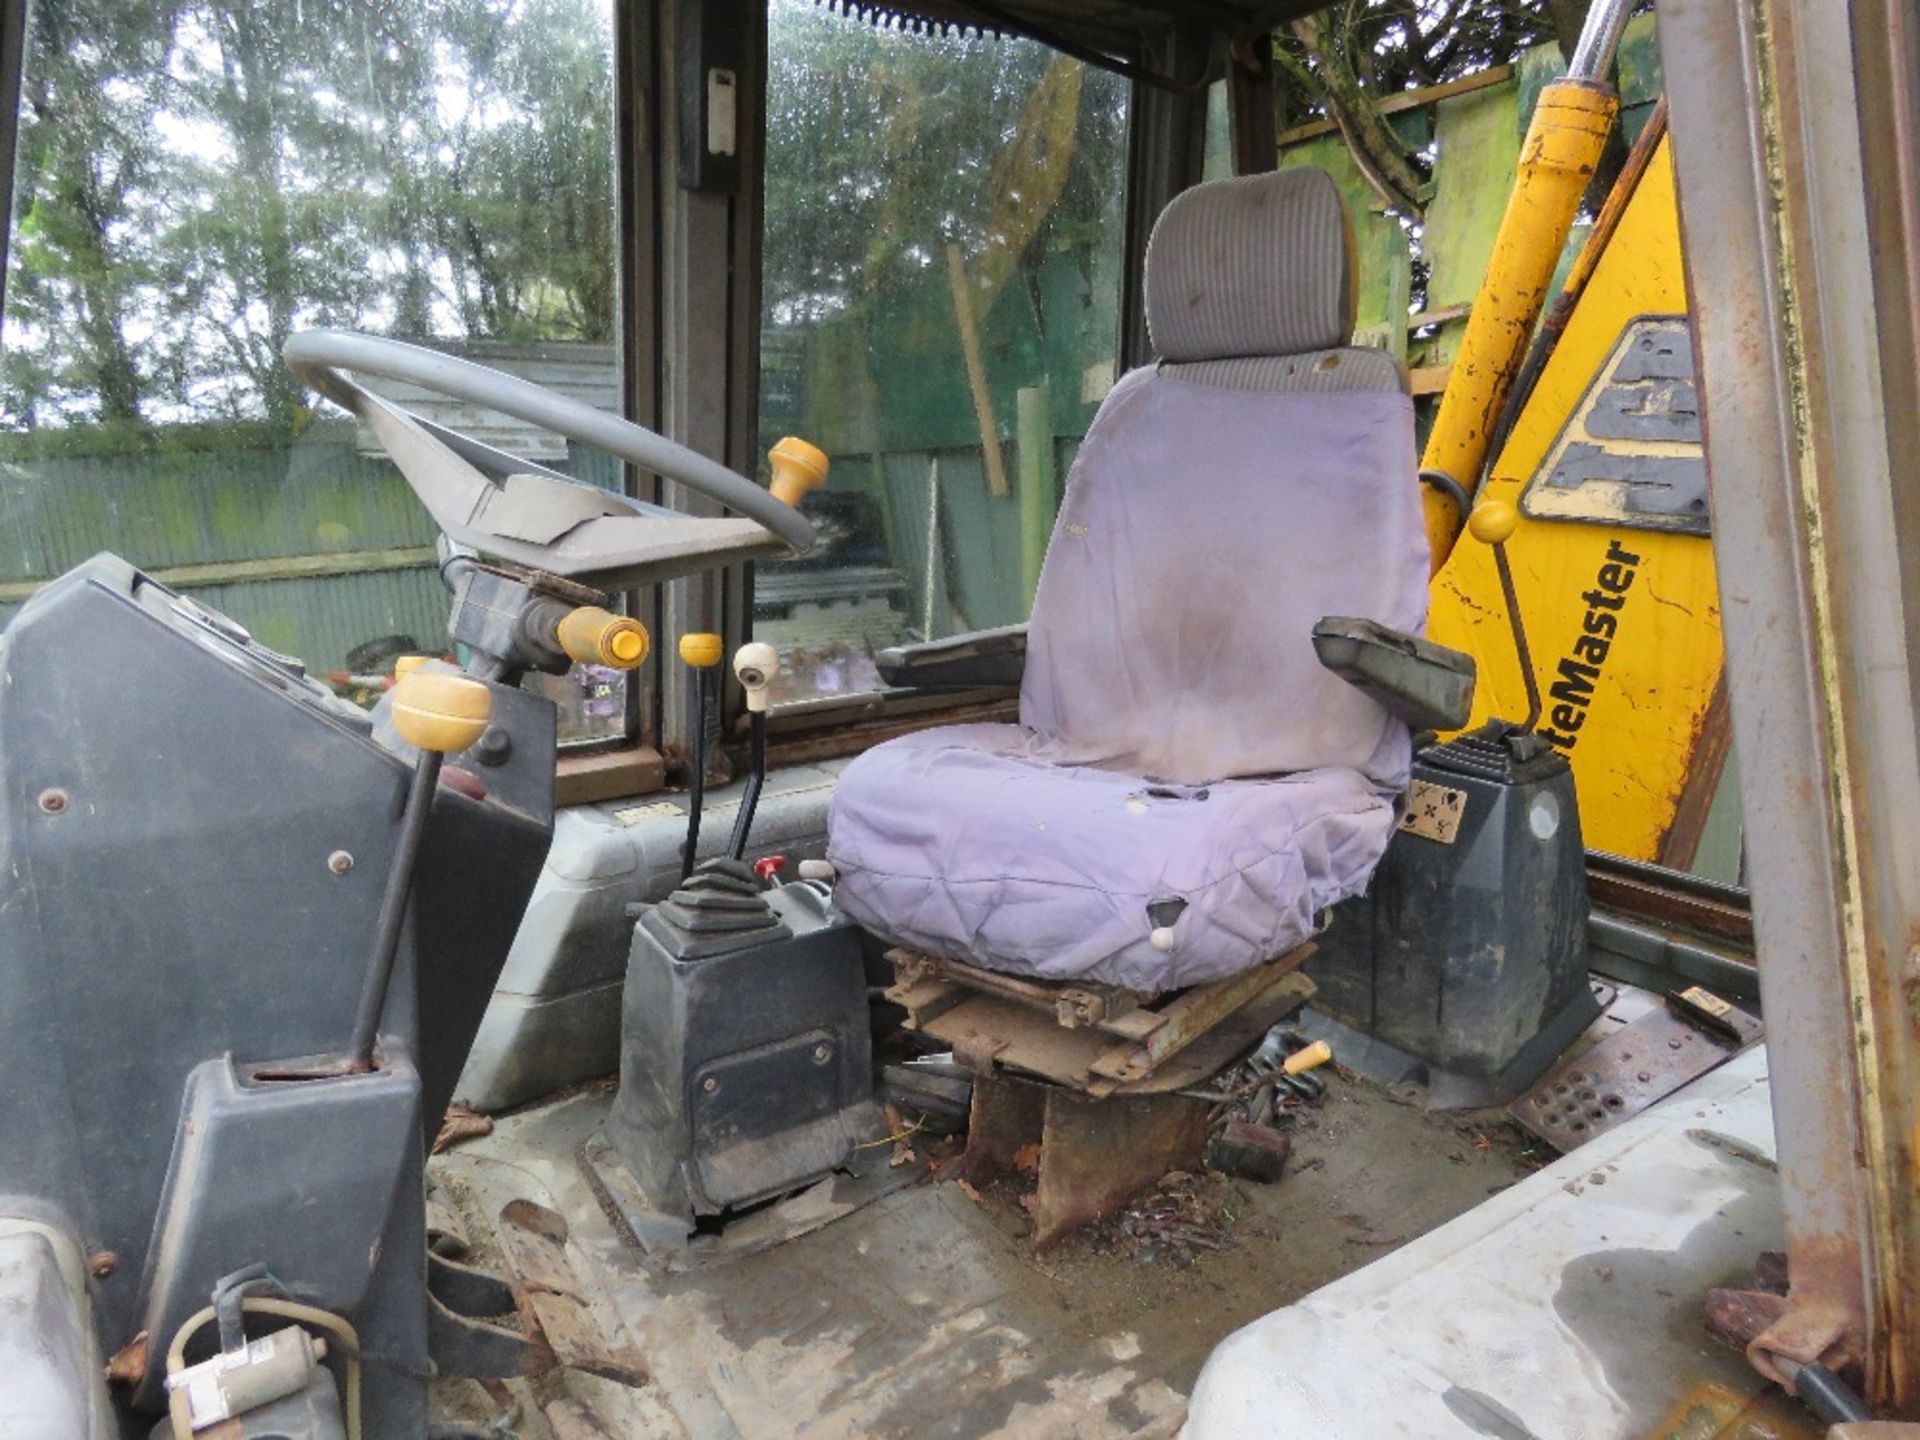 JCB 3CX SITEMASTER BACKHOE LOADER REG:F539 SDE. TYPE 3CX-4/34 SN:509602.F. WITH 4 IN 1 BUCKET PLUS - Image 7 of 7